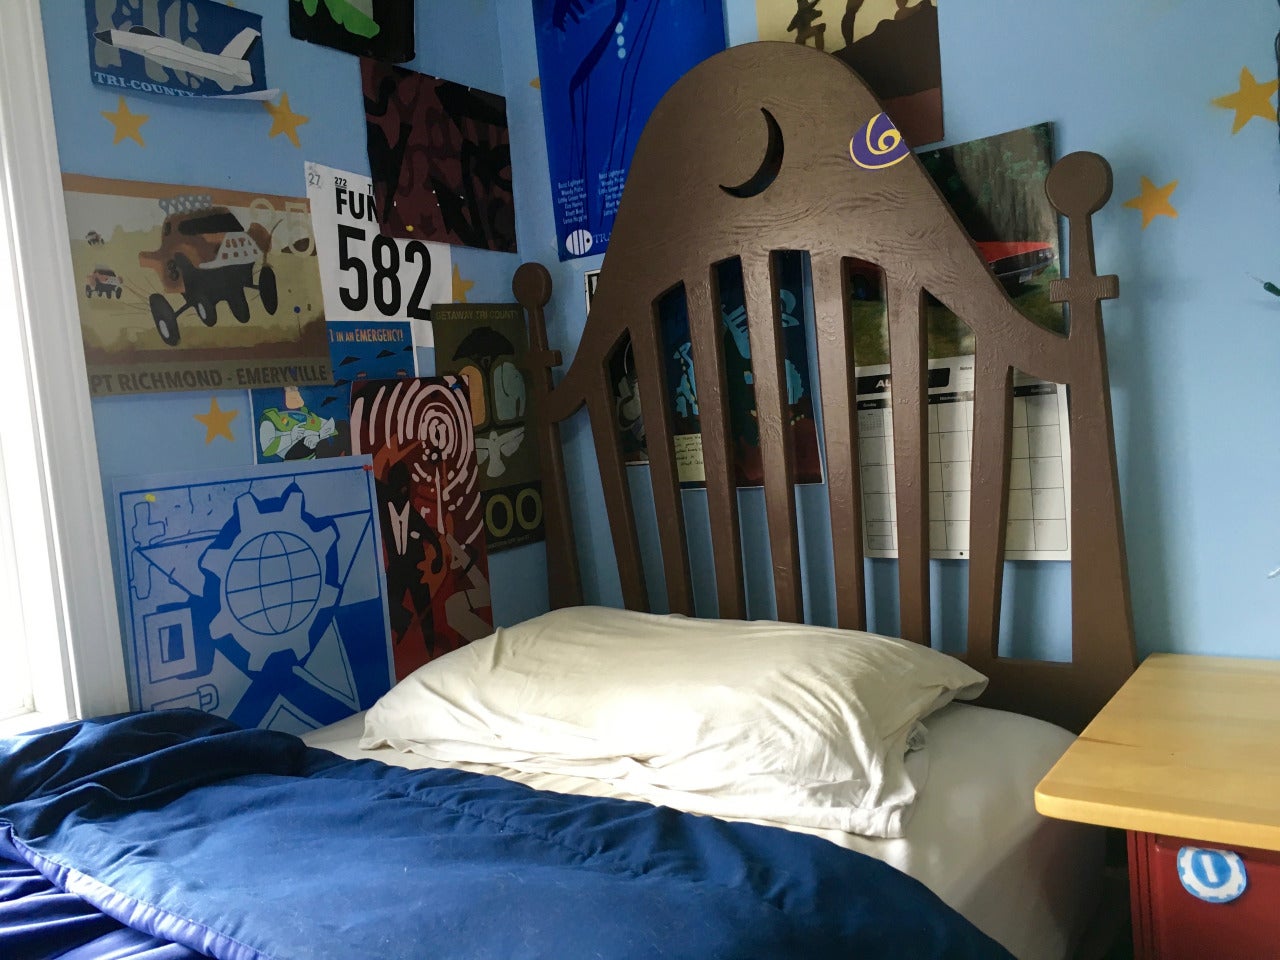 Toy Story Superfans Recreate Andy S Bedroom With Staggering